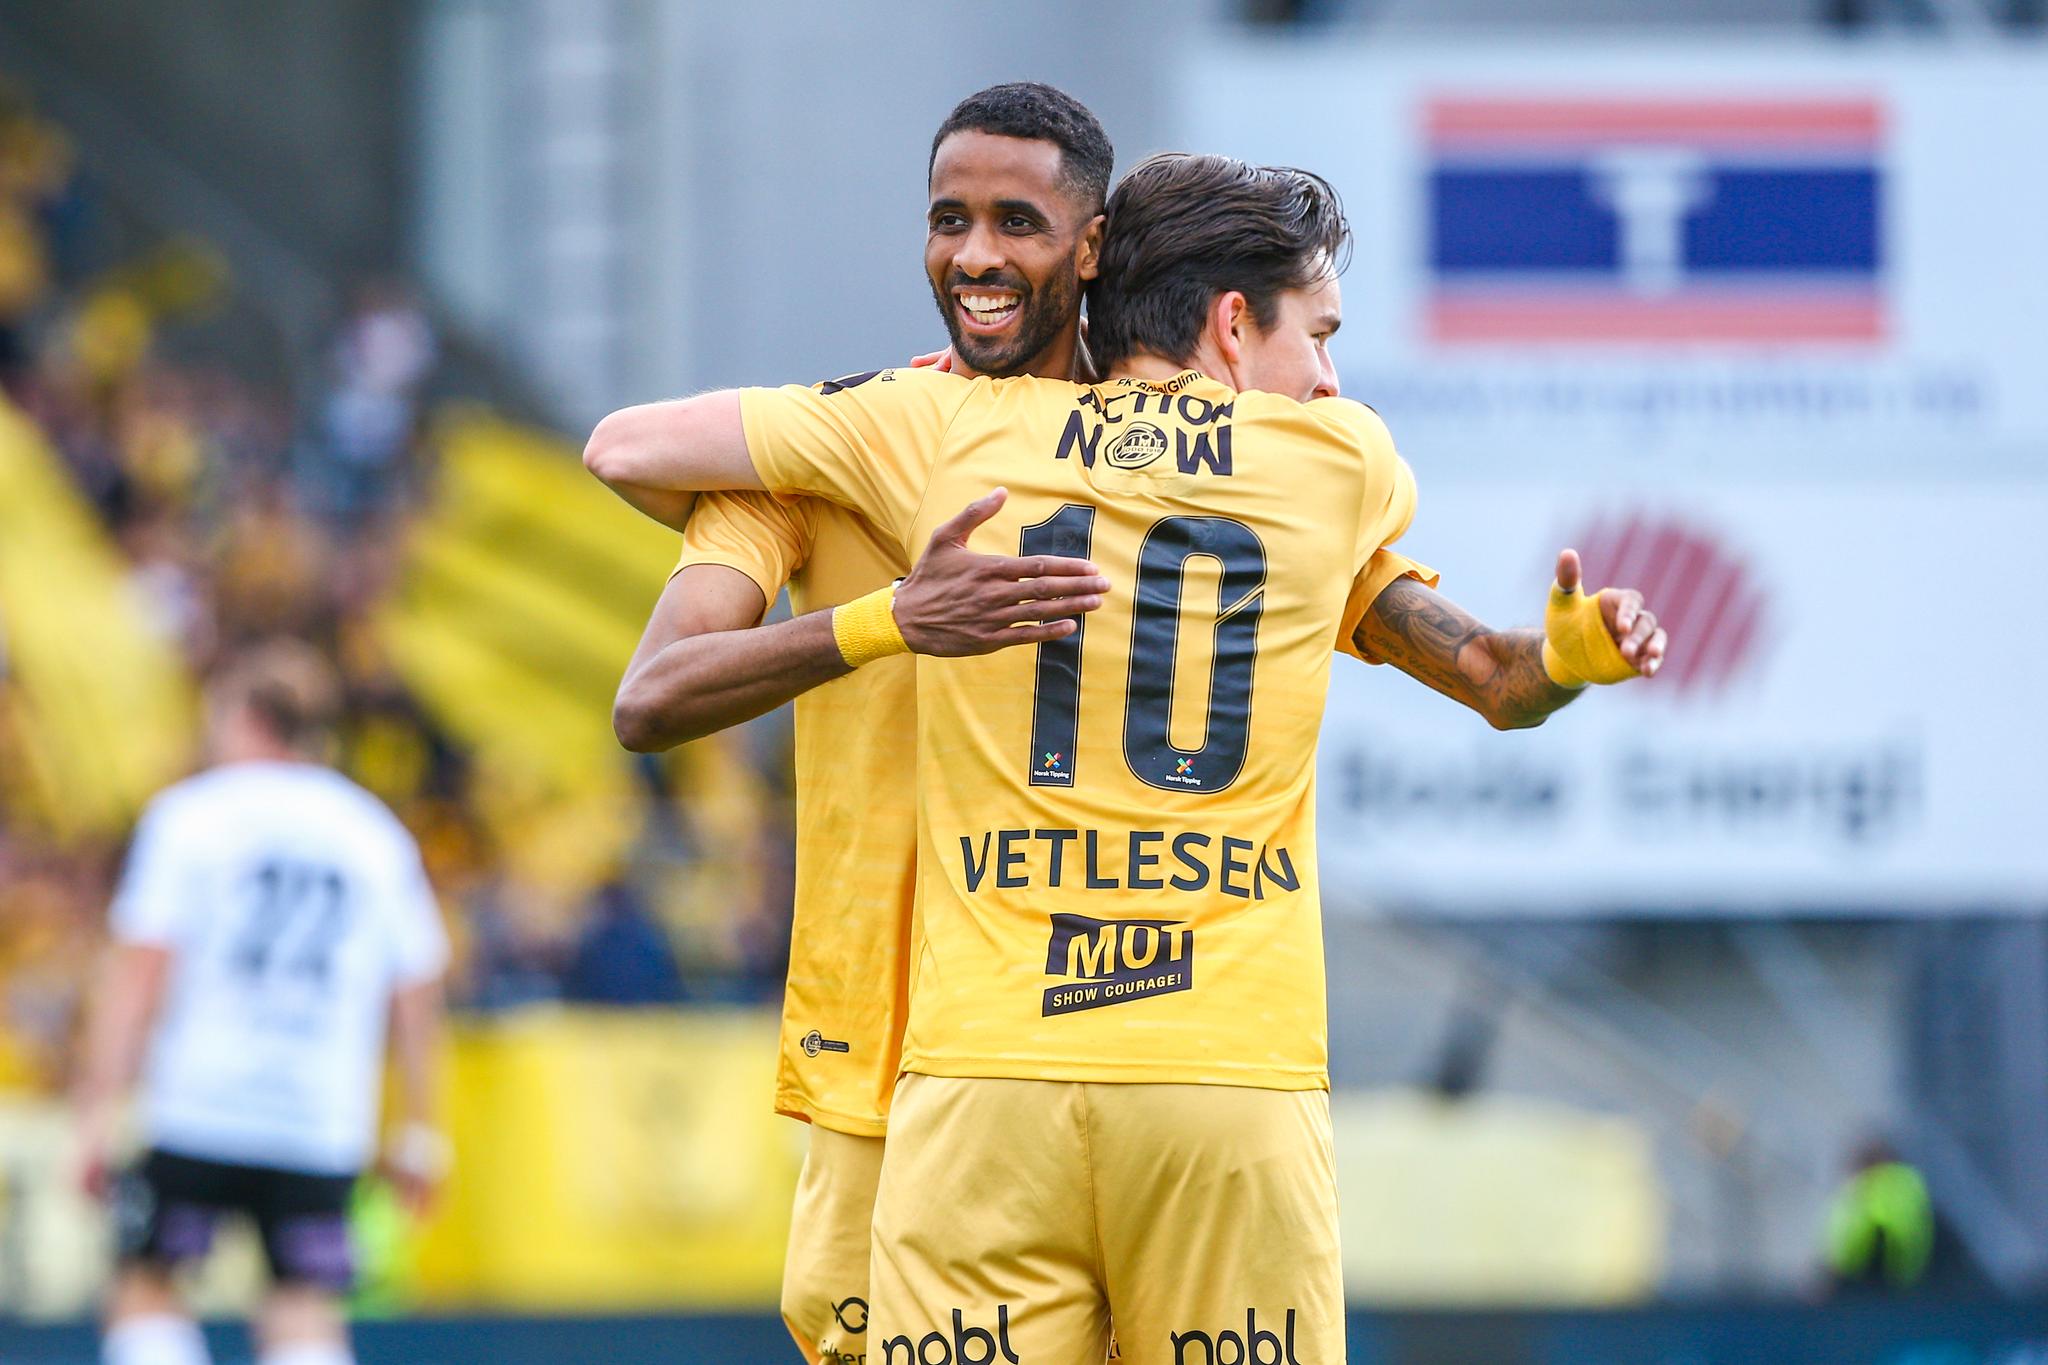 Unstoppable Glimt embarrassing coincidence Odd: – Shameful and embarrassing